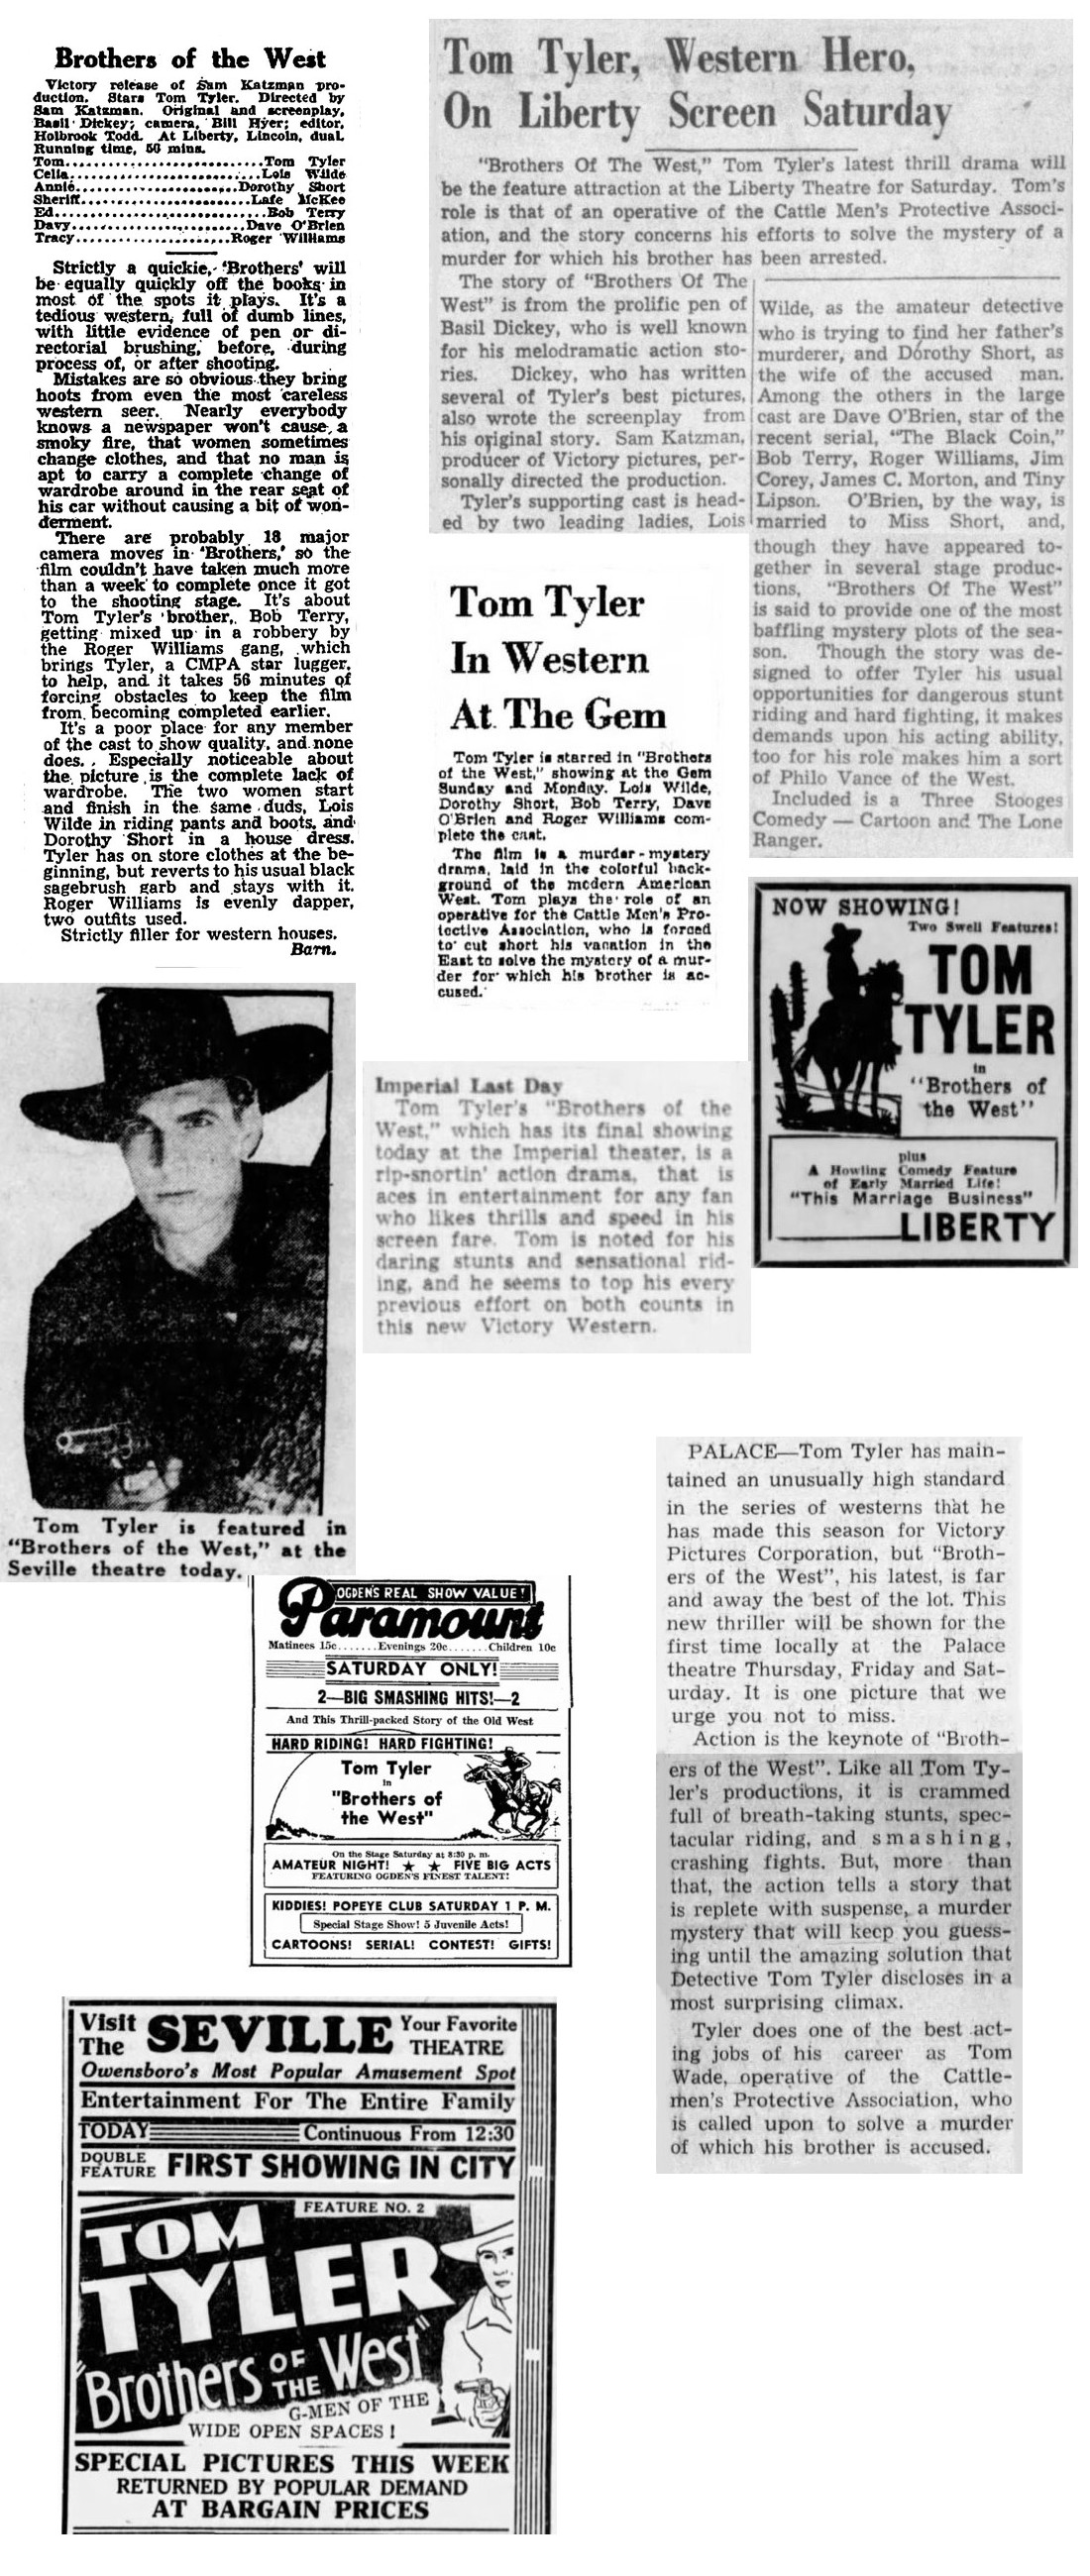 Brothers of the West cinema ads film reviews